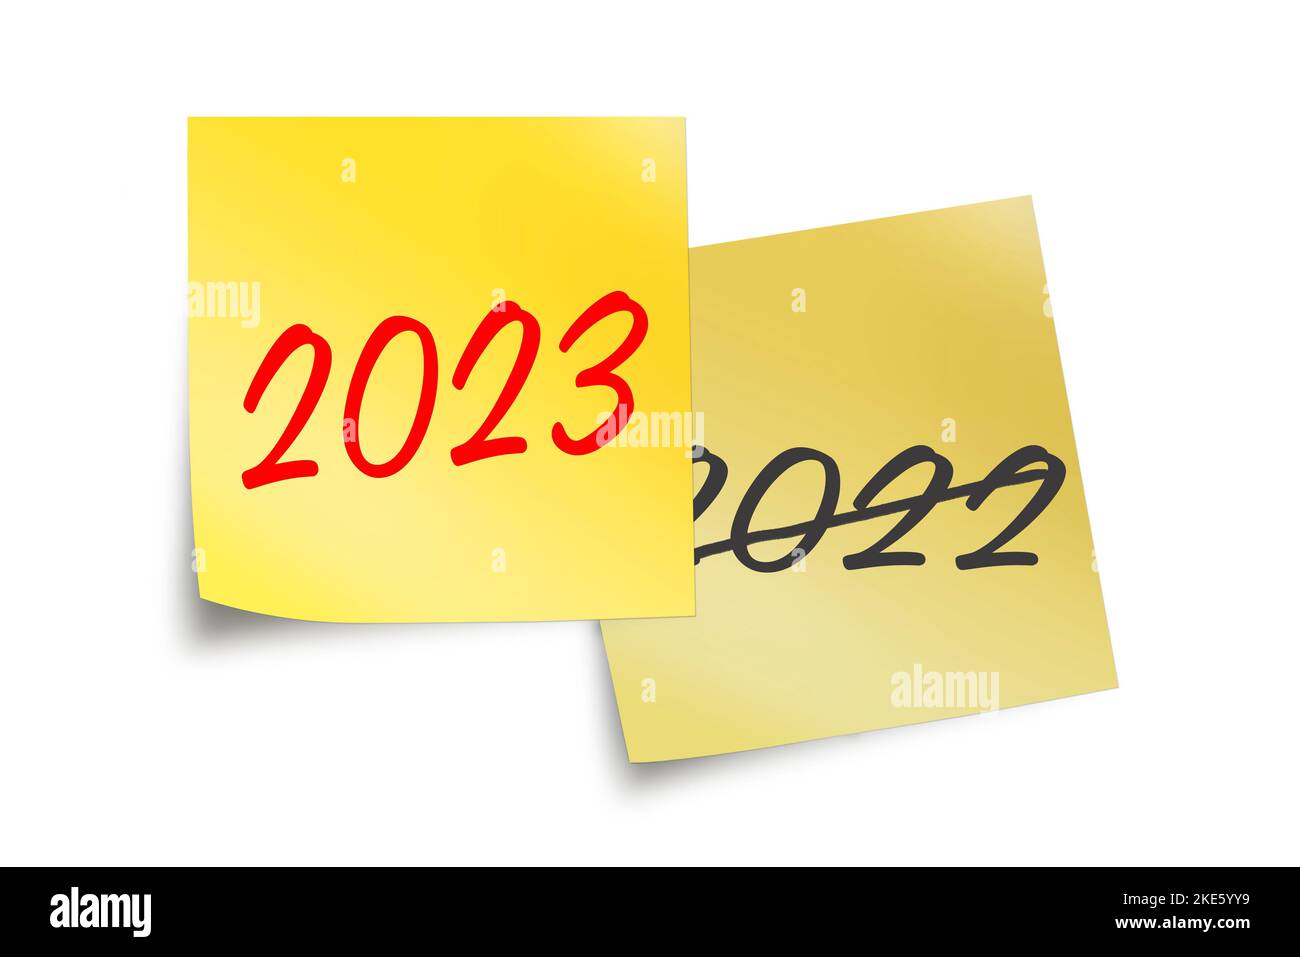 2023 and 2022 written on yellow sticky notes isolated on white, new year business illustration Stock Photo